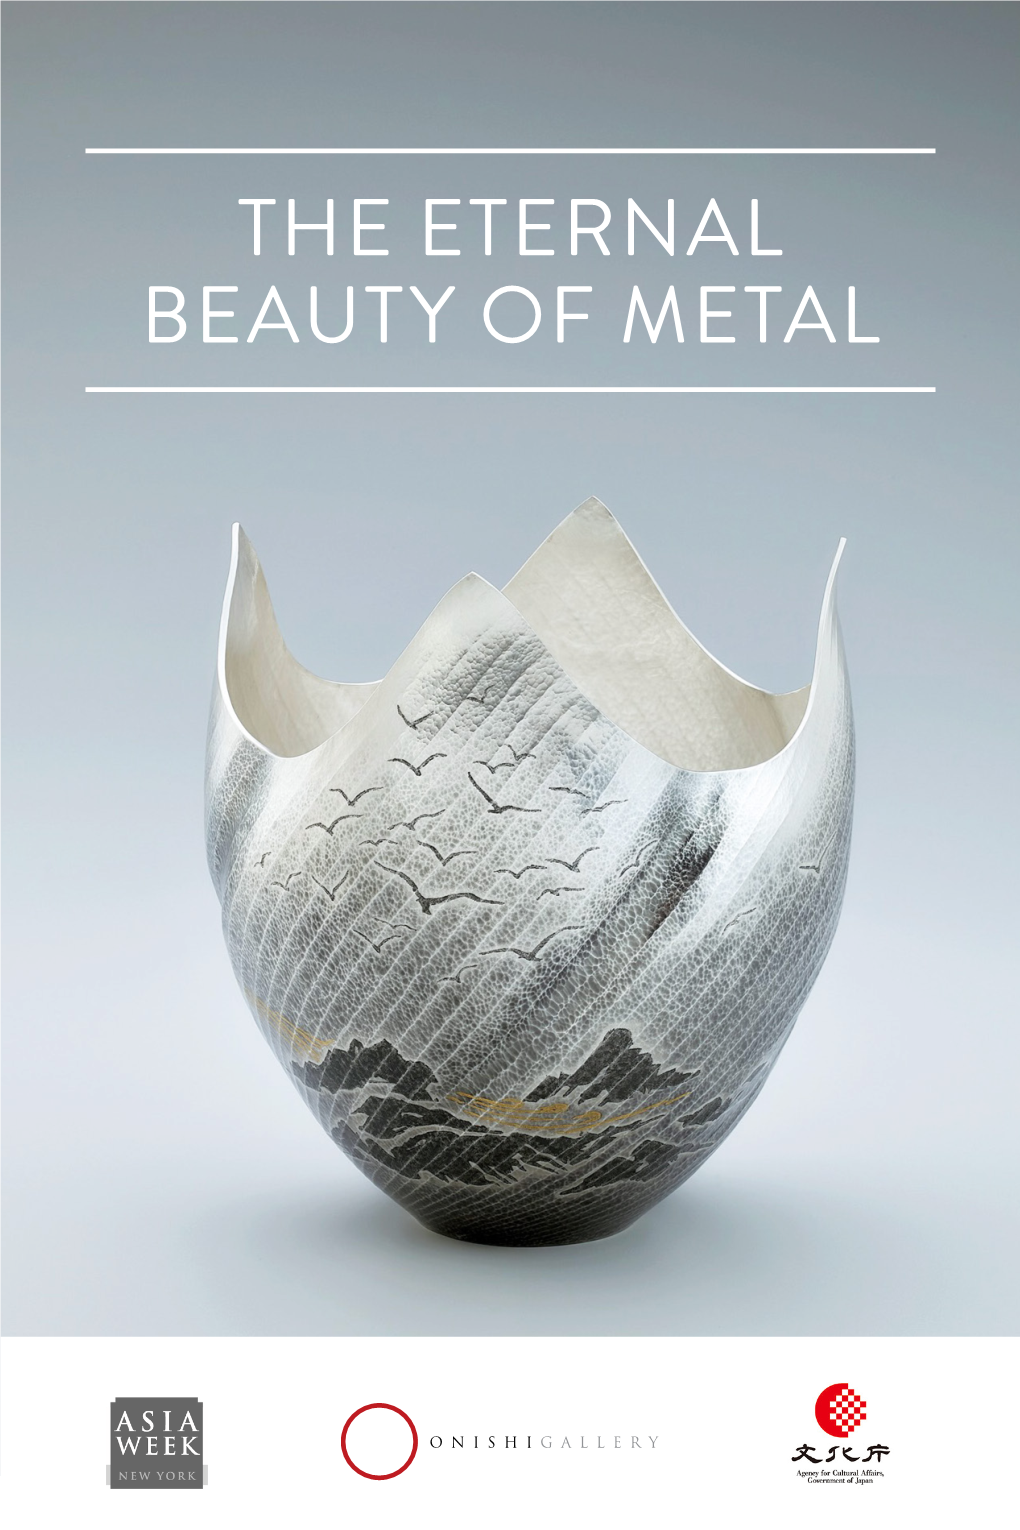 THE ETERNAL BEAUTY of METAL Chelsea Gallery Announces Pioneering Exhibition of Contemprary Japanese Metal Art